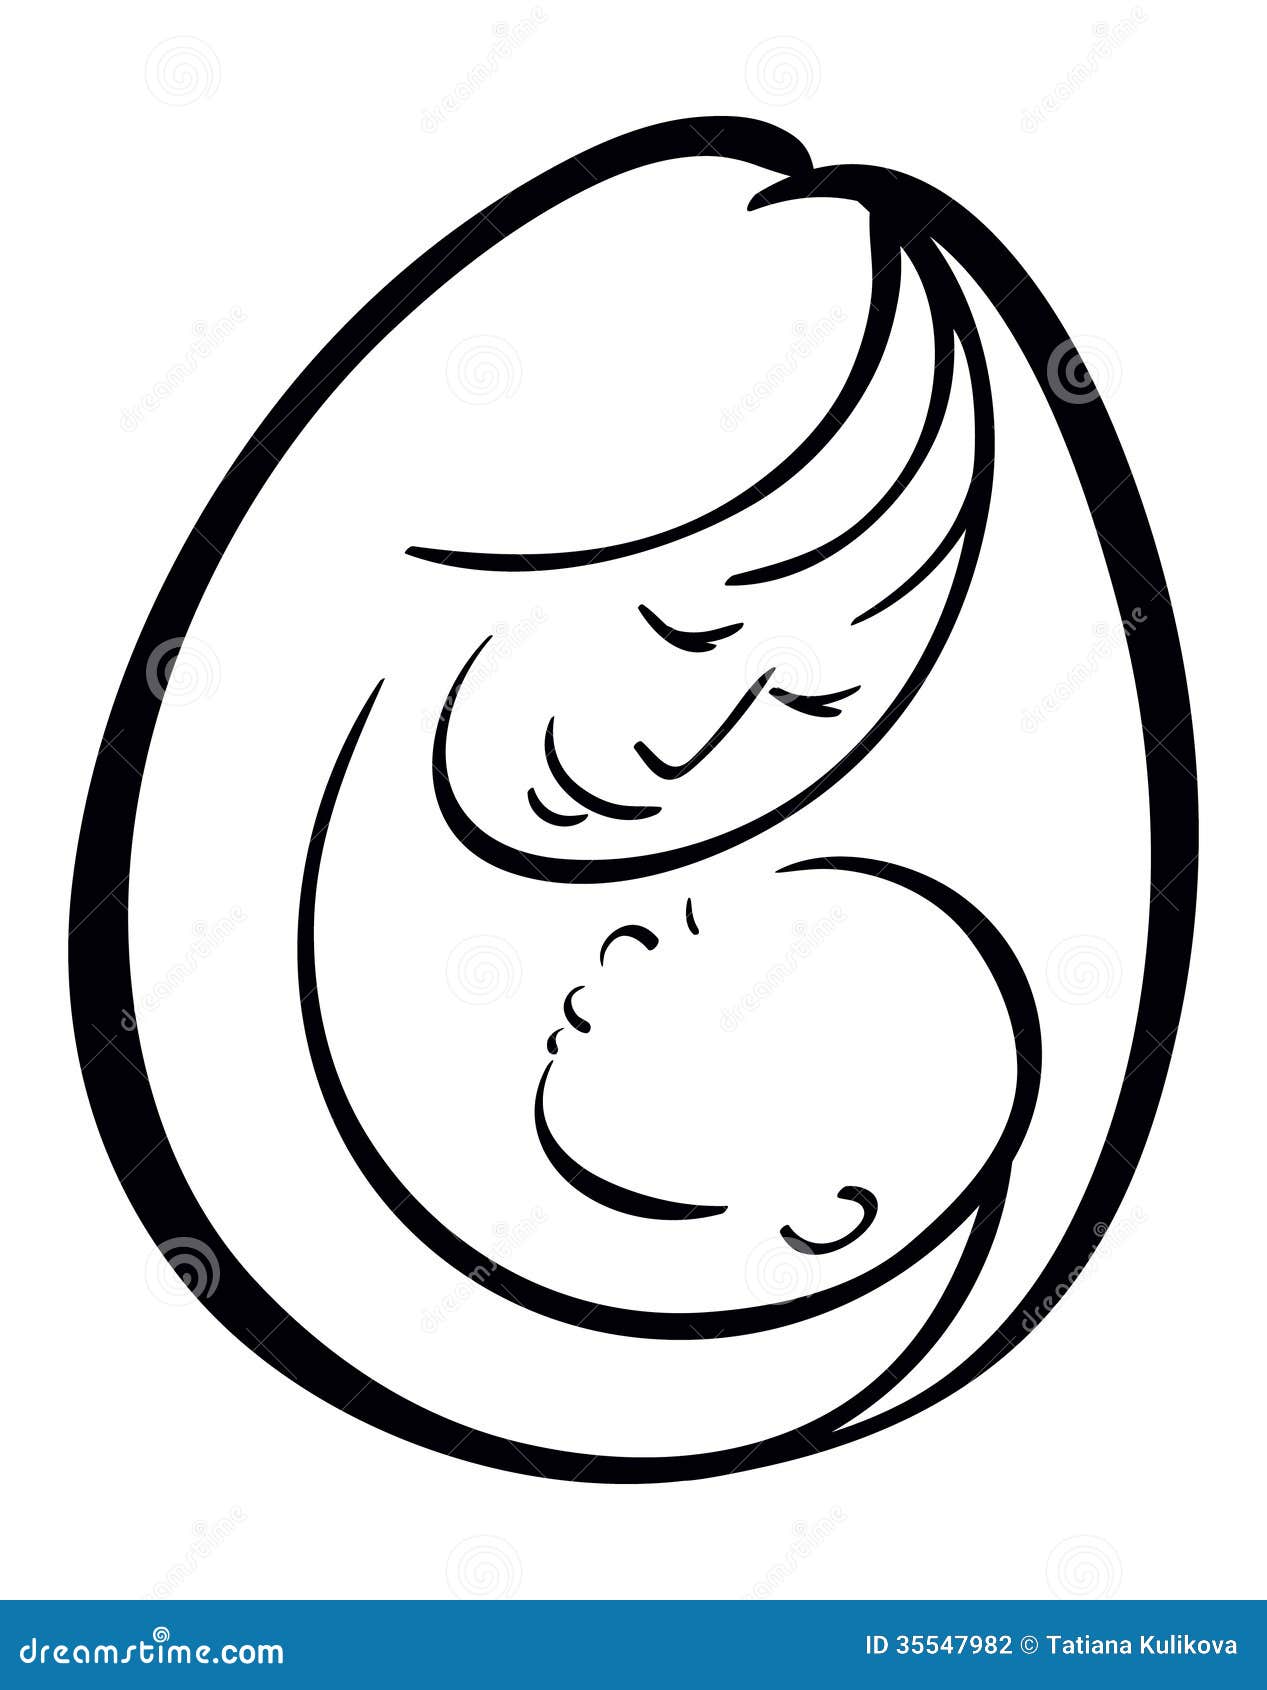 mother clipart black and white - photo #46